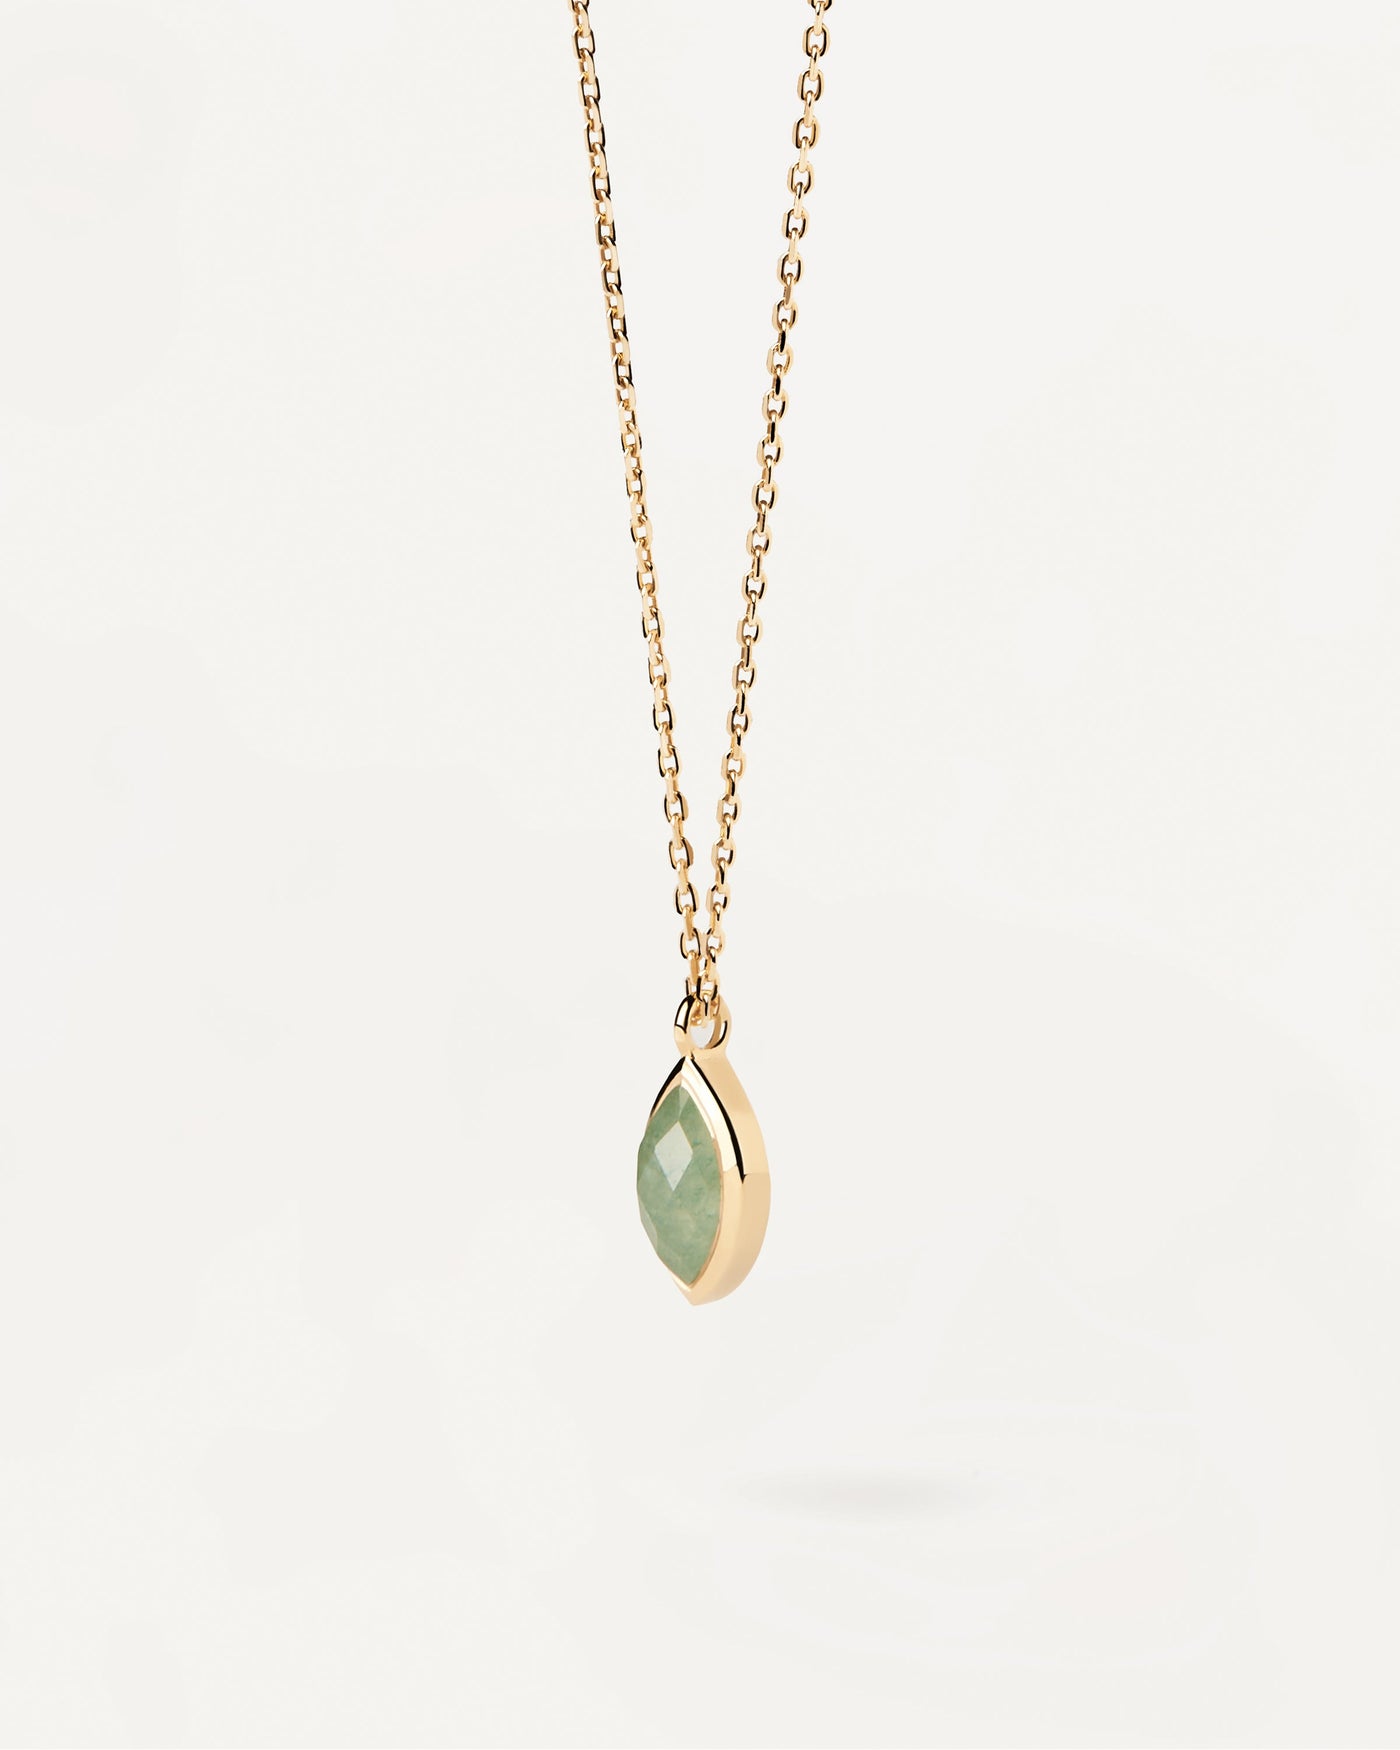 2023 Selection |  Green Aventurine Nomad Necklace. Gold-plated chain necklace with marquise cut green gemstone pendant. Get the latest arrival from PDPAOLA. Place your order safely and get this Best Seller. Free Shipping.